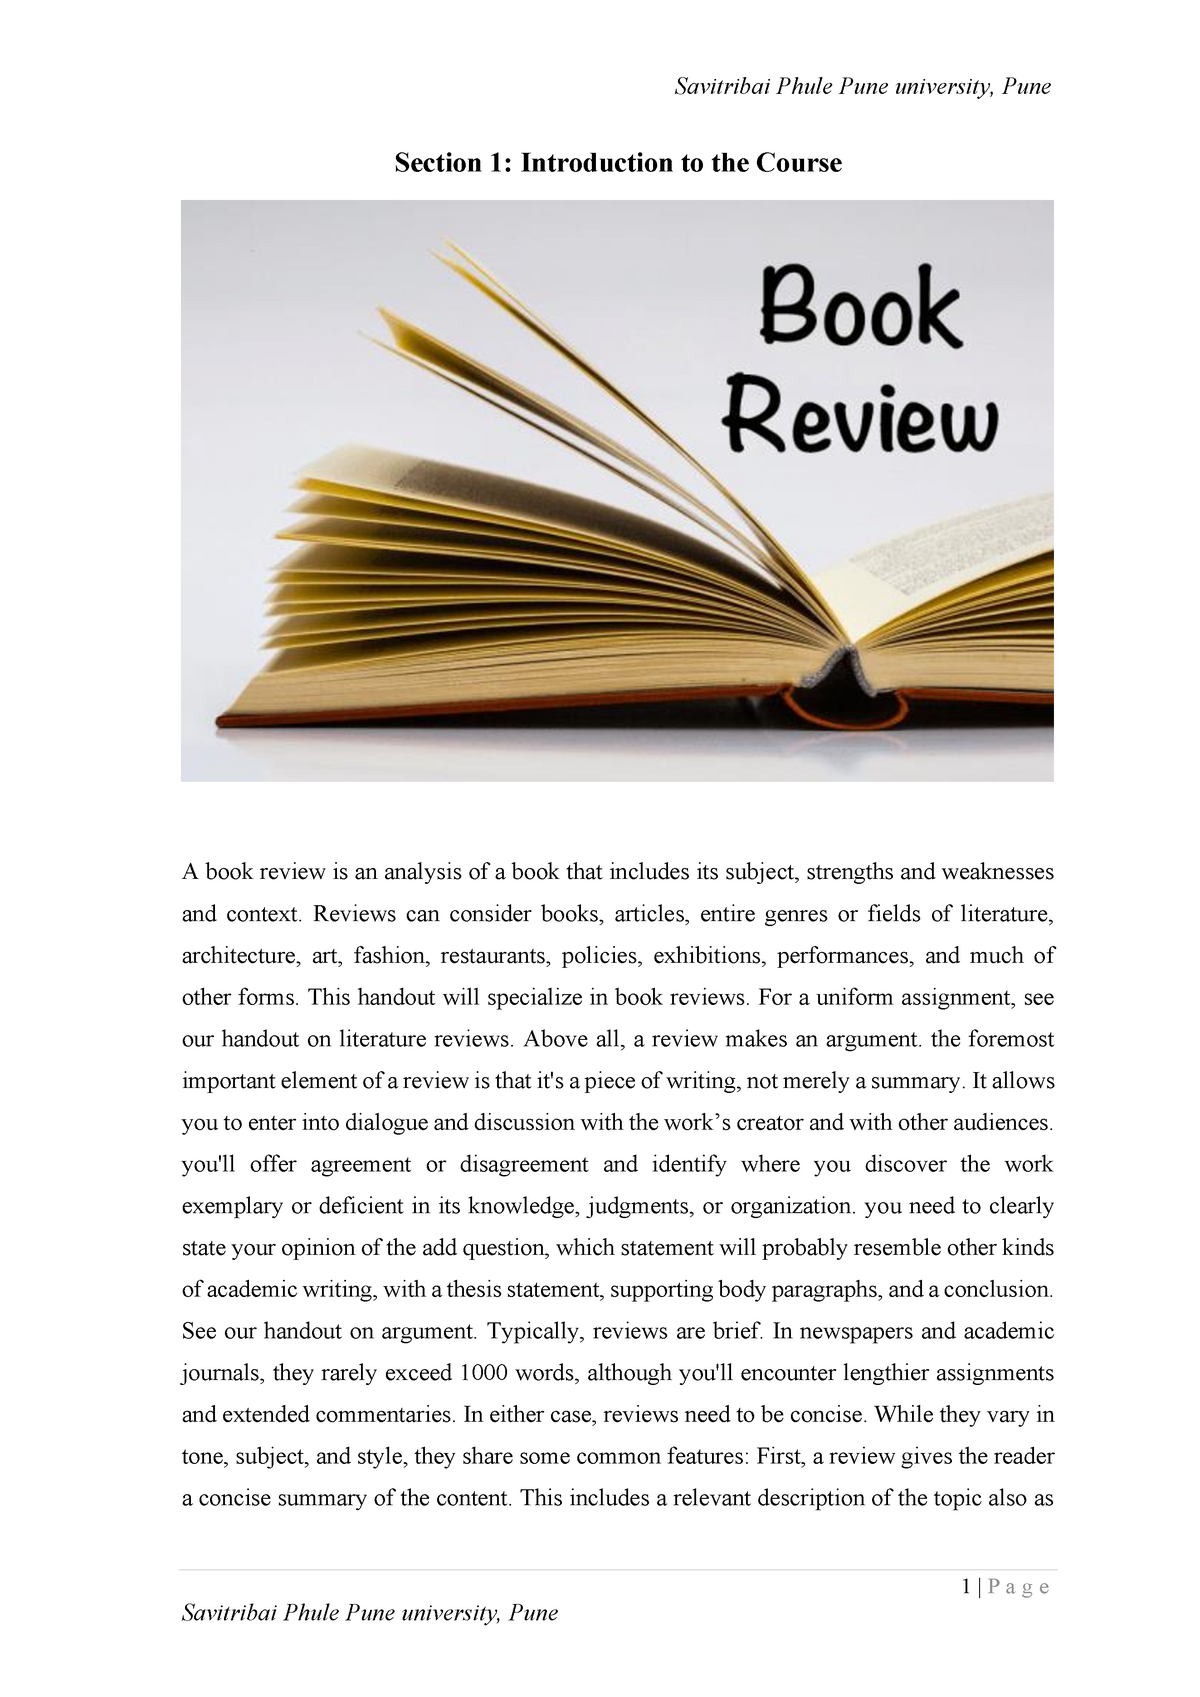 book review assignment pdf